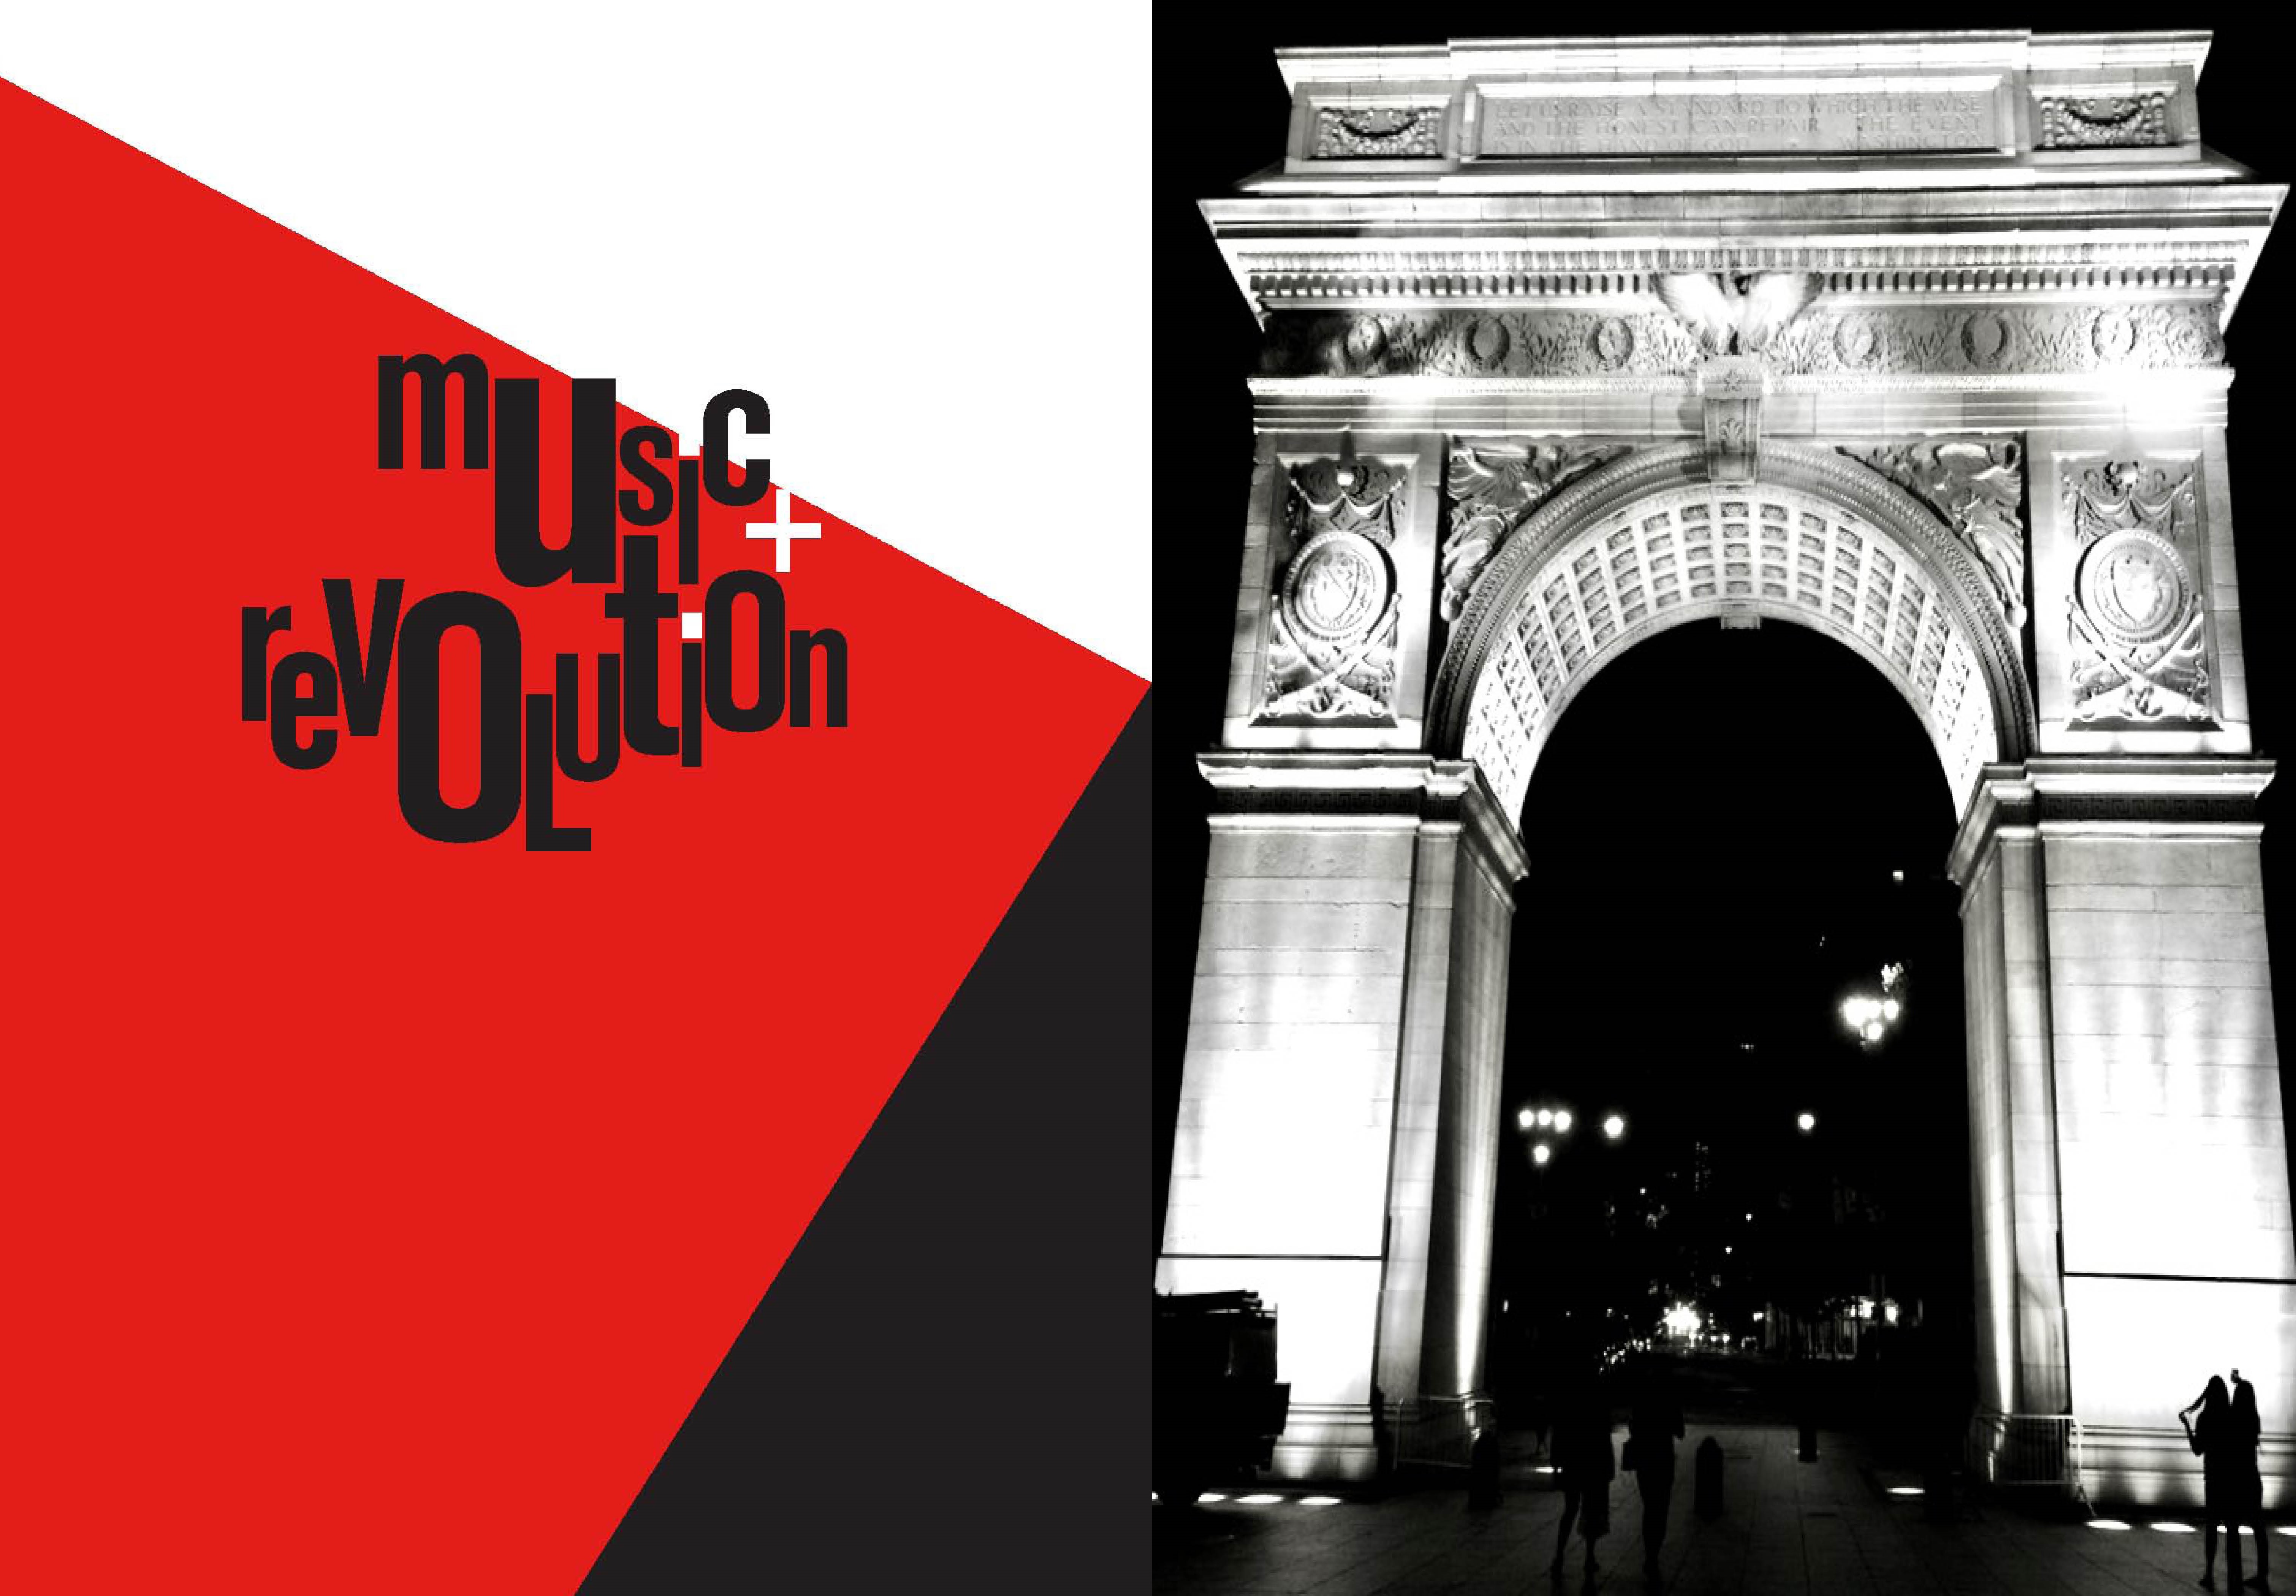 Two images in a banner: Music + Revolution on the left side and an image of Washington Square Park Arch on the right. 